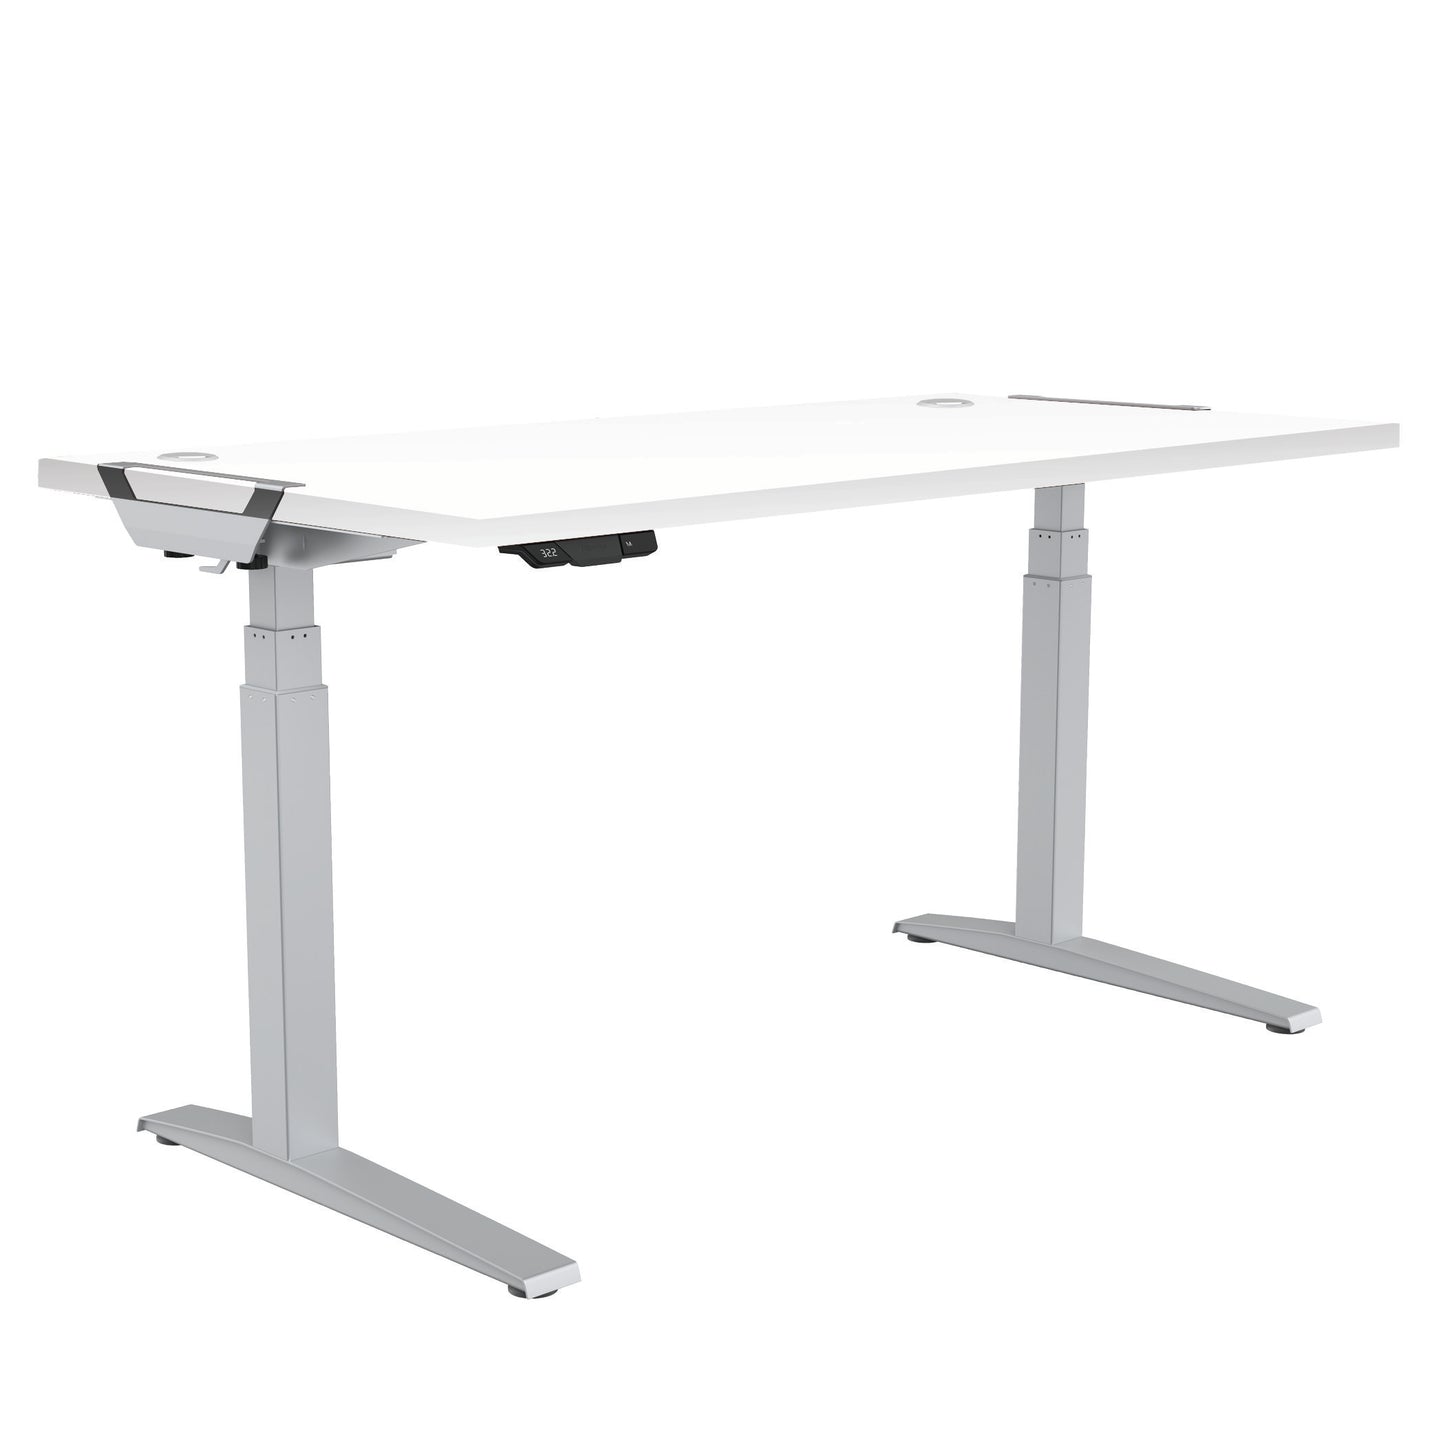 BUY FELOOWES Levado Height Adjustable Desk FREE SHIPPING 8949401. Standing desk/sit stand desk/stand up desk available with white table tops.